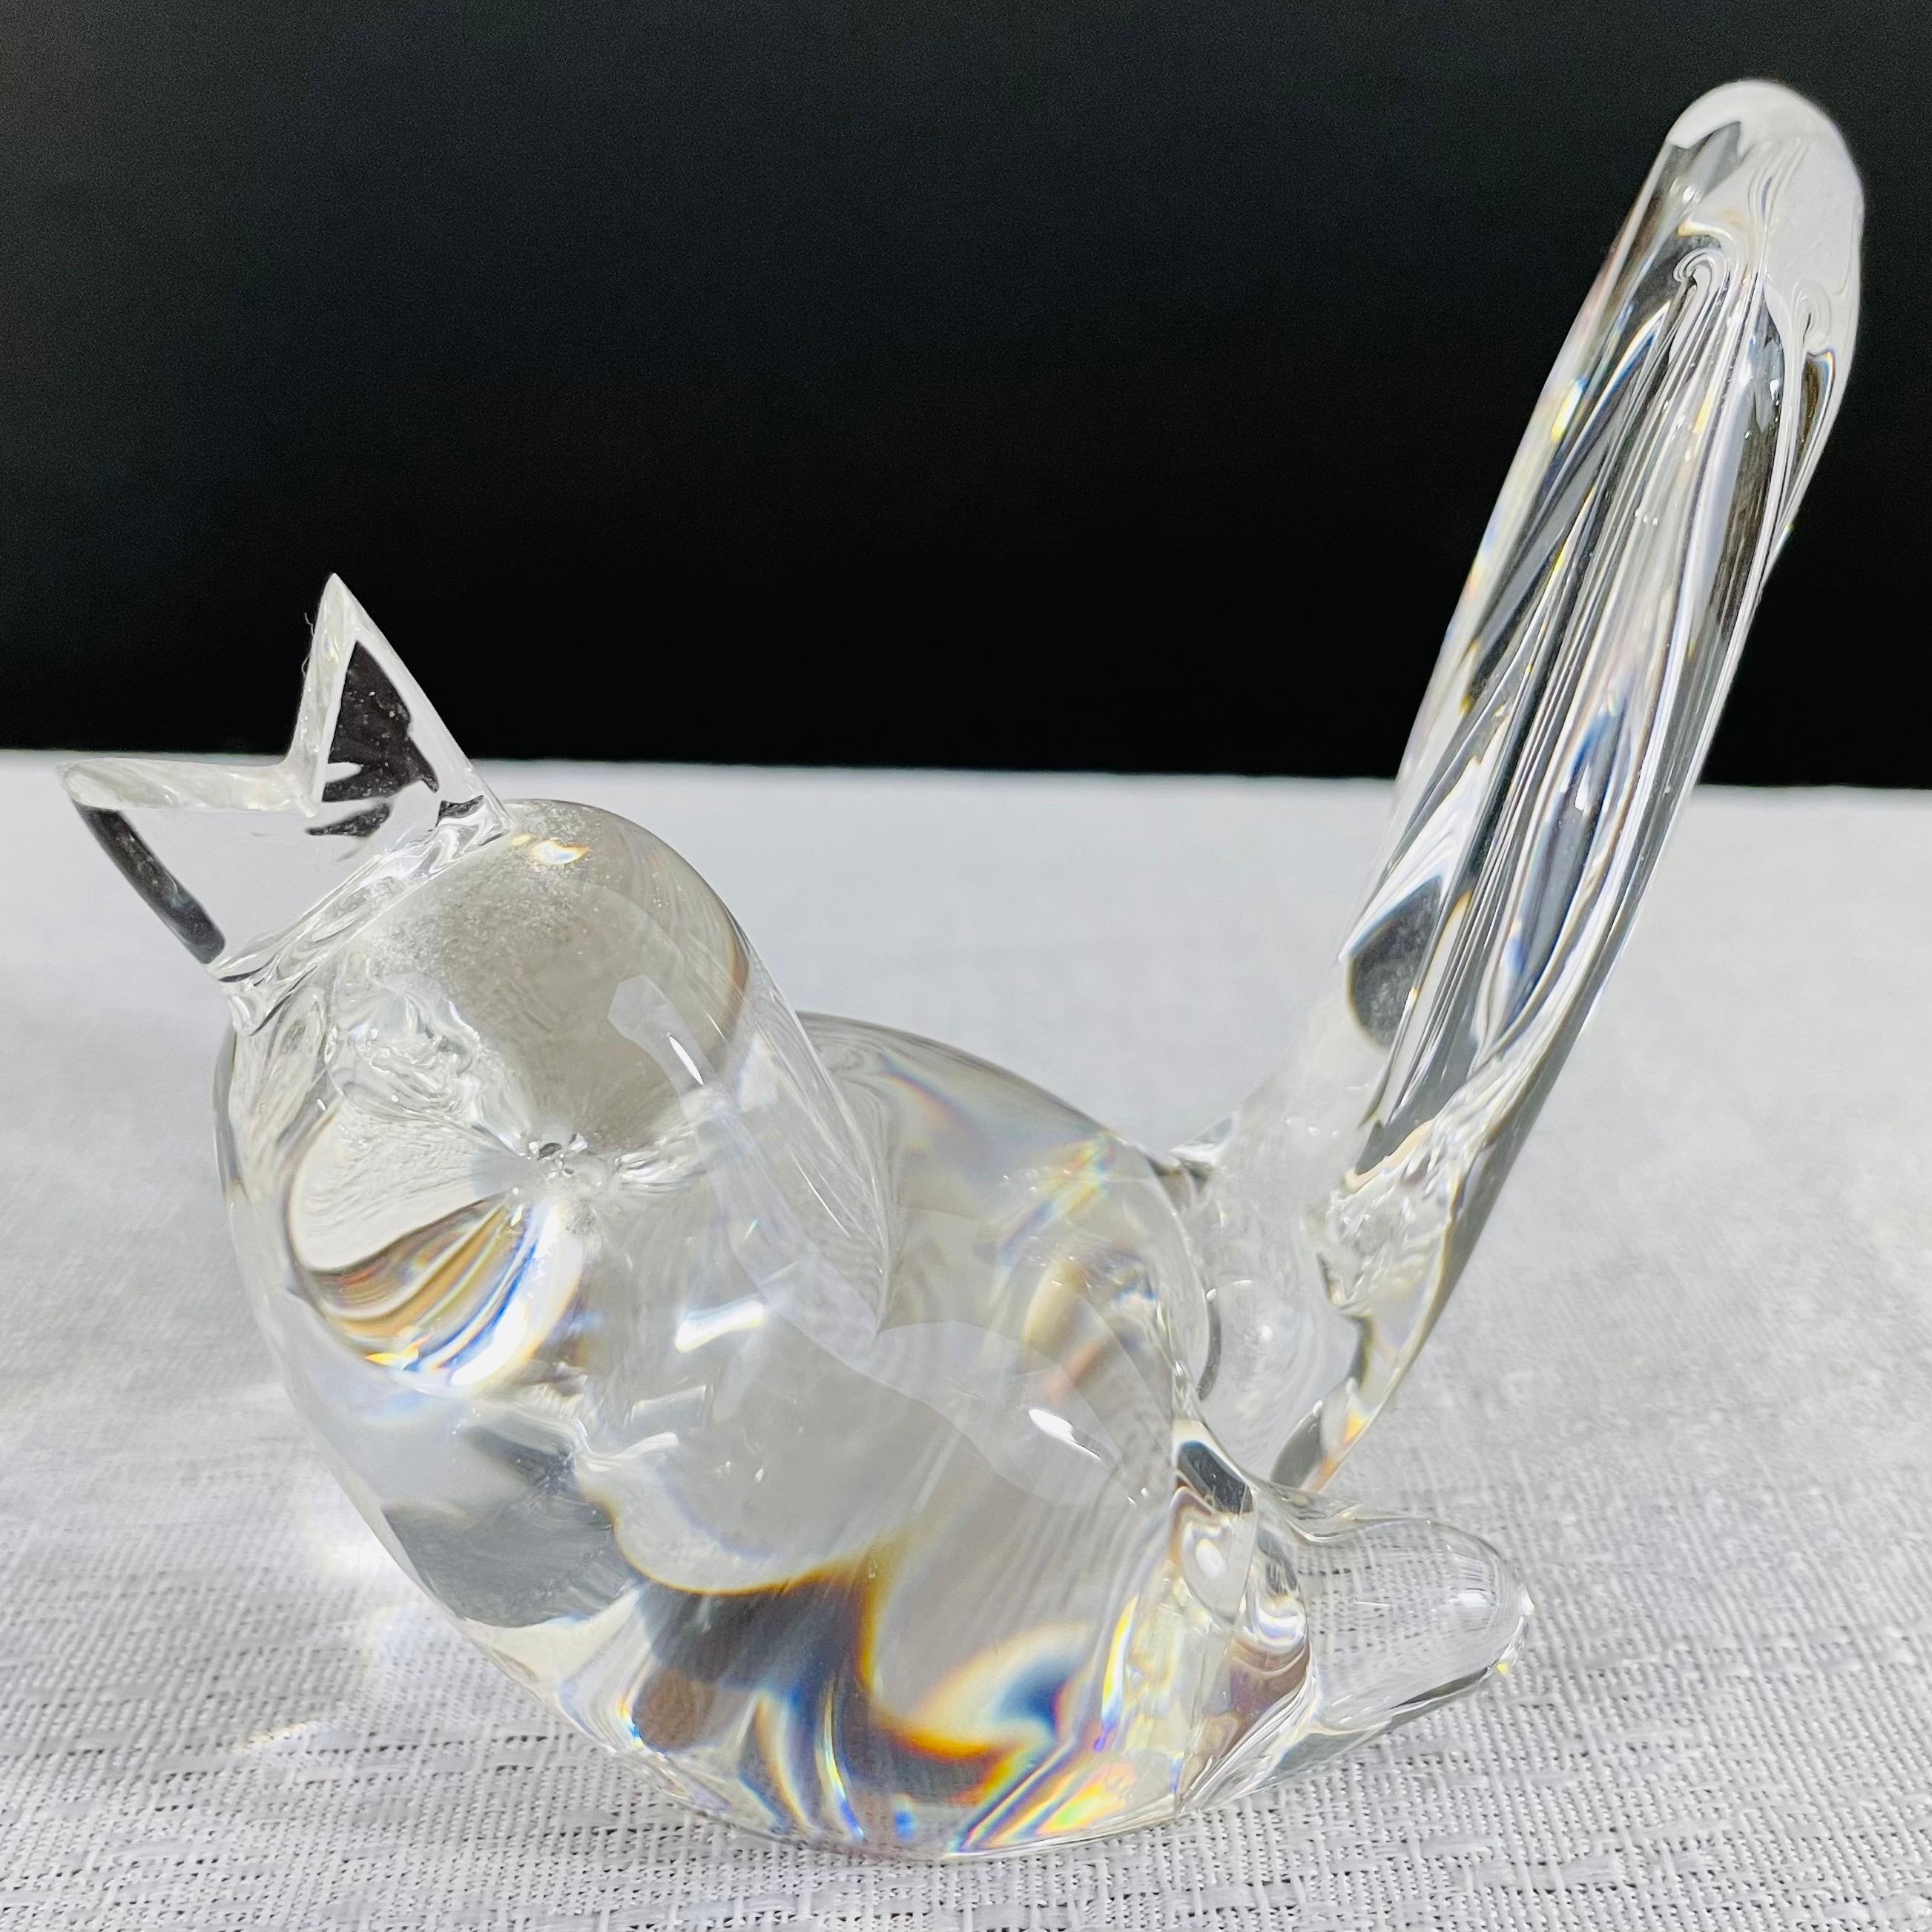 Mid-century Steuben Glass Songbird figurine designed George Thompson in 1963. 

About Steuben : Steuben Glass is an American art glass manufacturer, founded in the summer of 1903 by Frederick Carder and Thomas G. Hawkes in Corning, New York, which